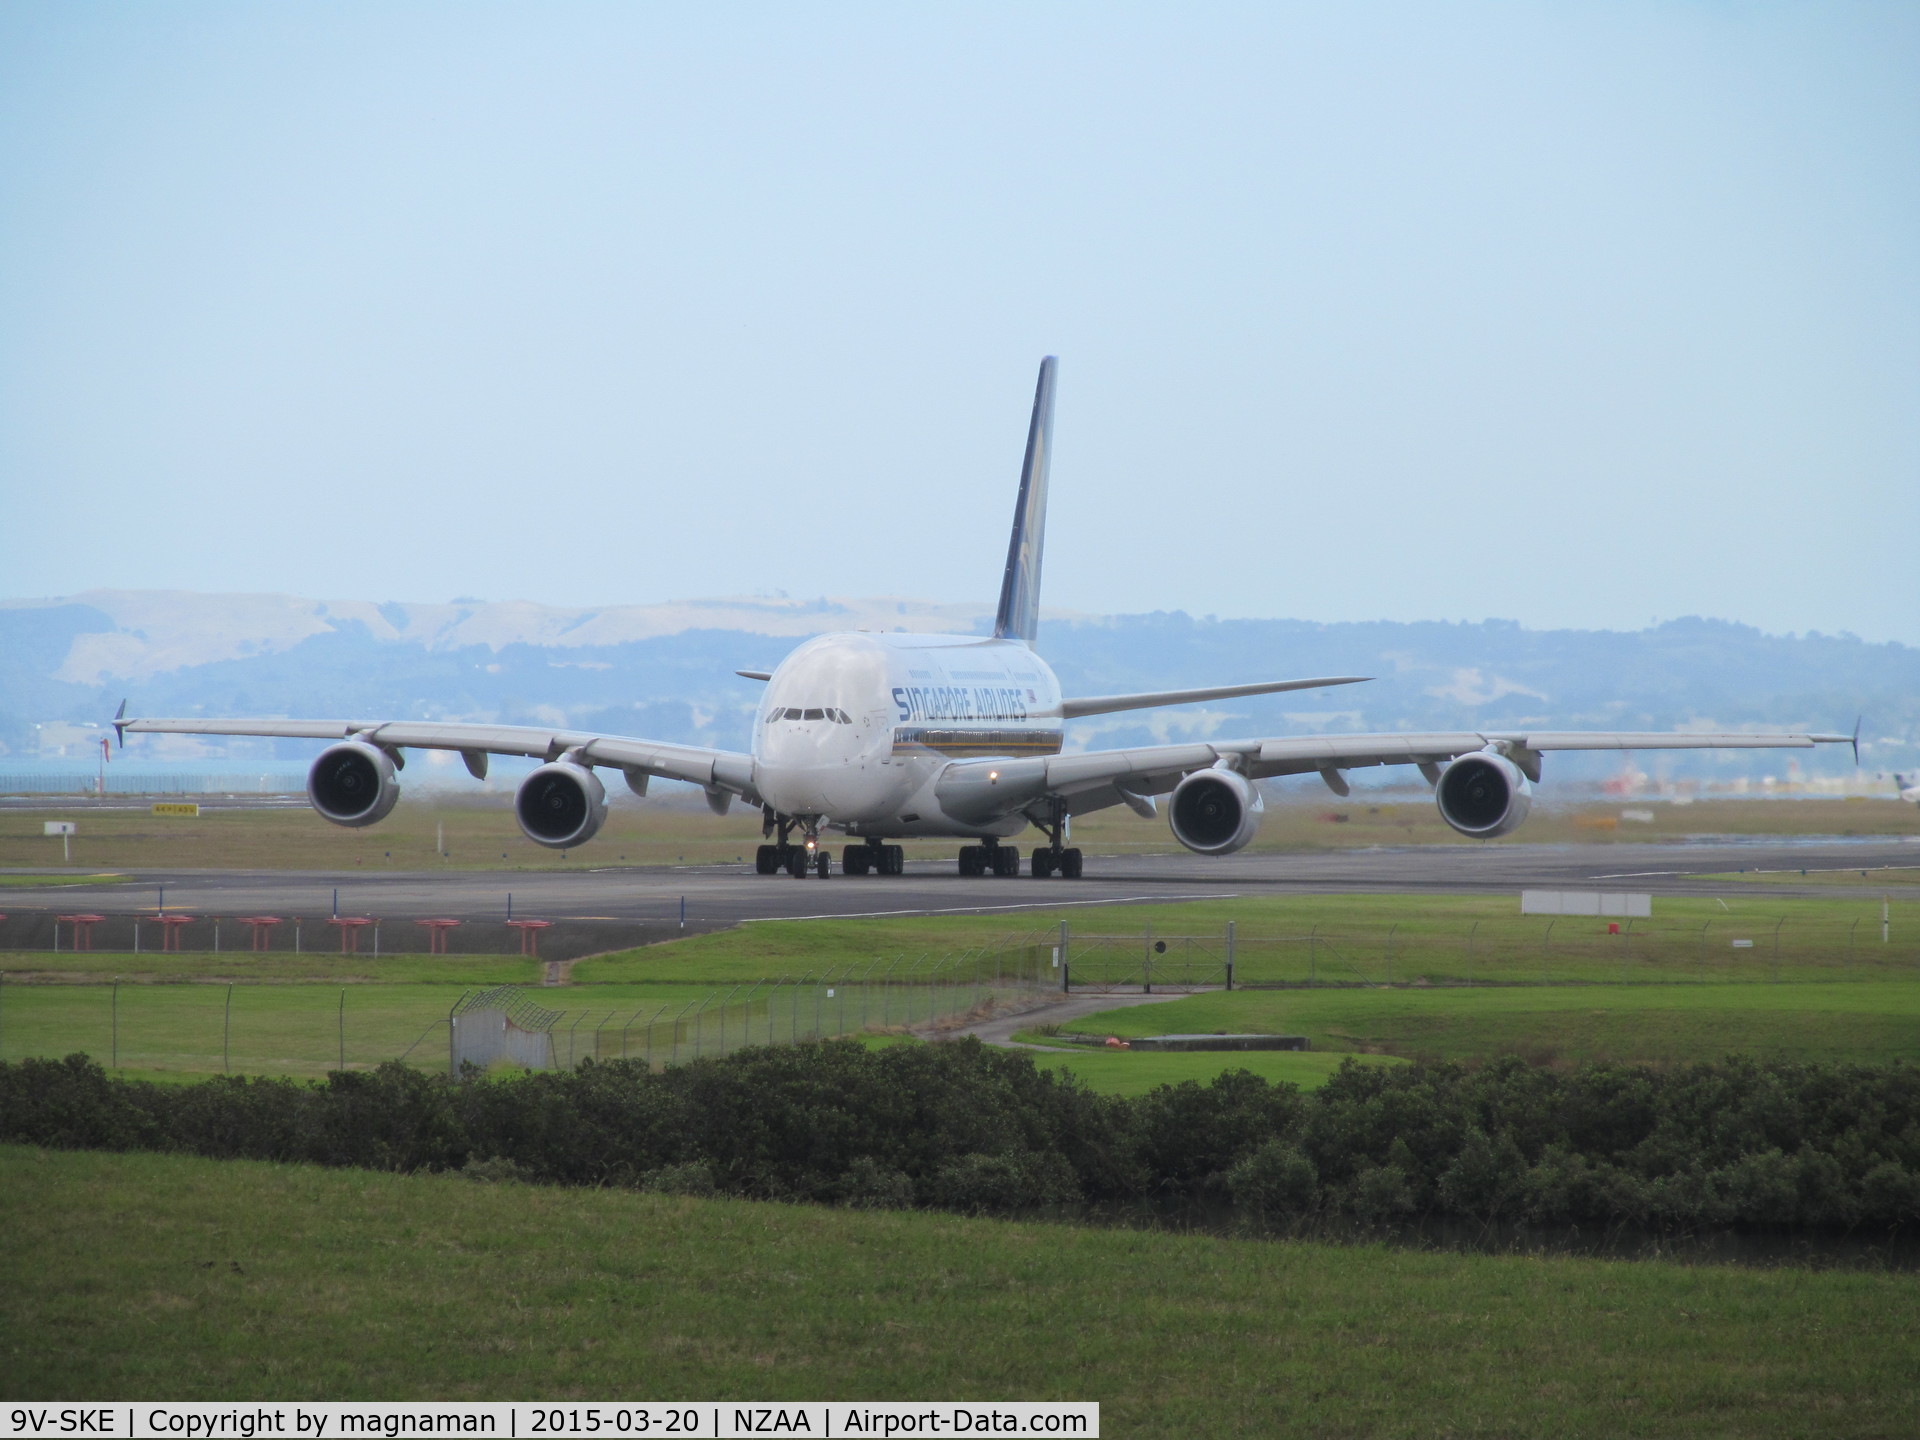 9V-SKE, 2007 Airbus A380-841 C/N 010, taxying for departure